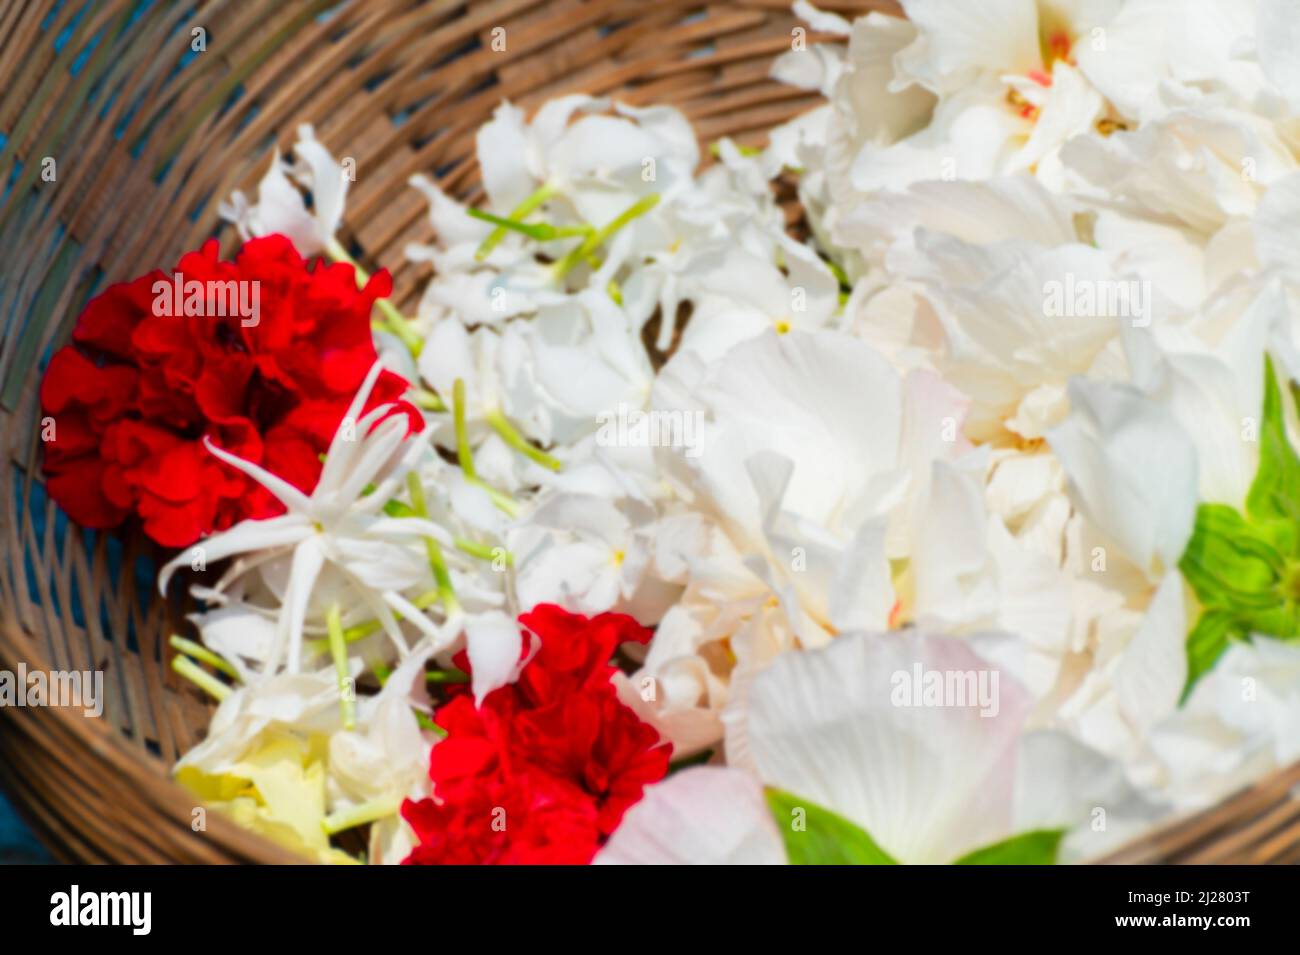 Blurred image of white sthal padma or Hibiscus mutabilis flowers, also known as the Confederate rose, Dixie rosemallow, cotton rose or cotton rosemall Stock Photo